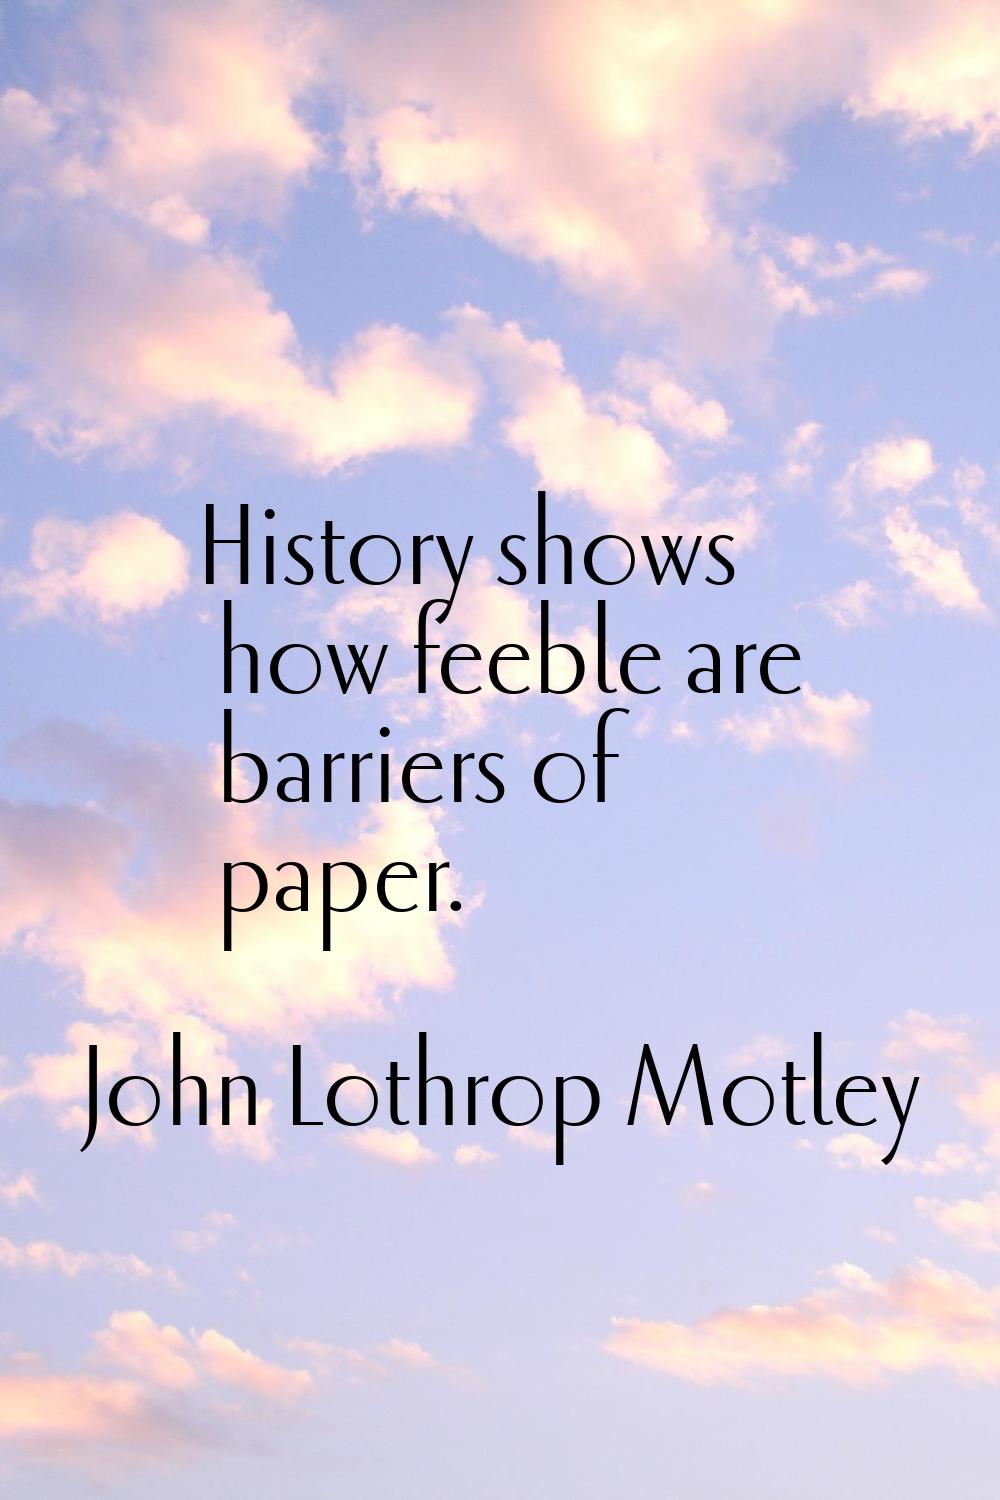 History shows how feeble are barriers of paper.